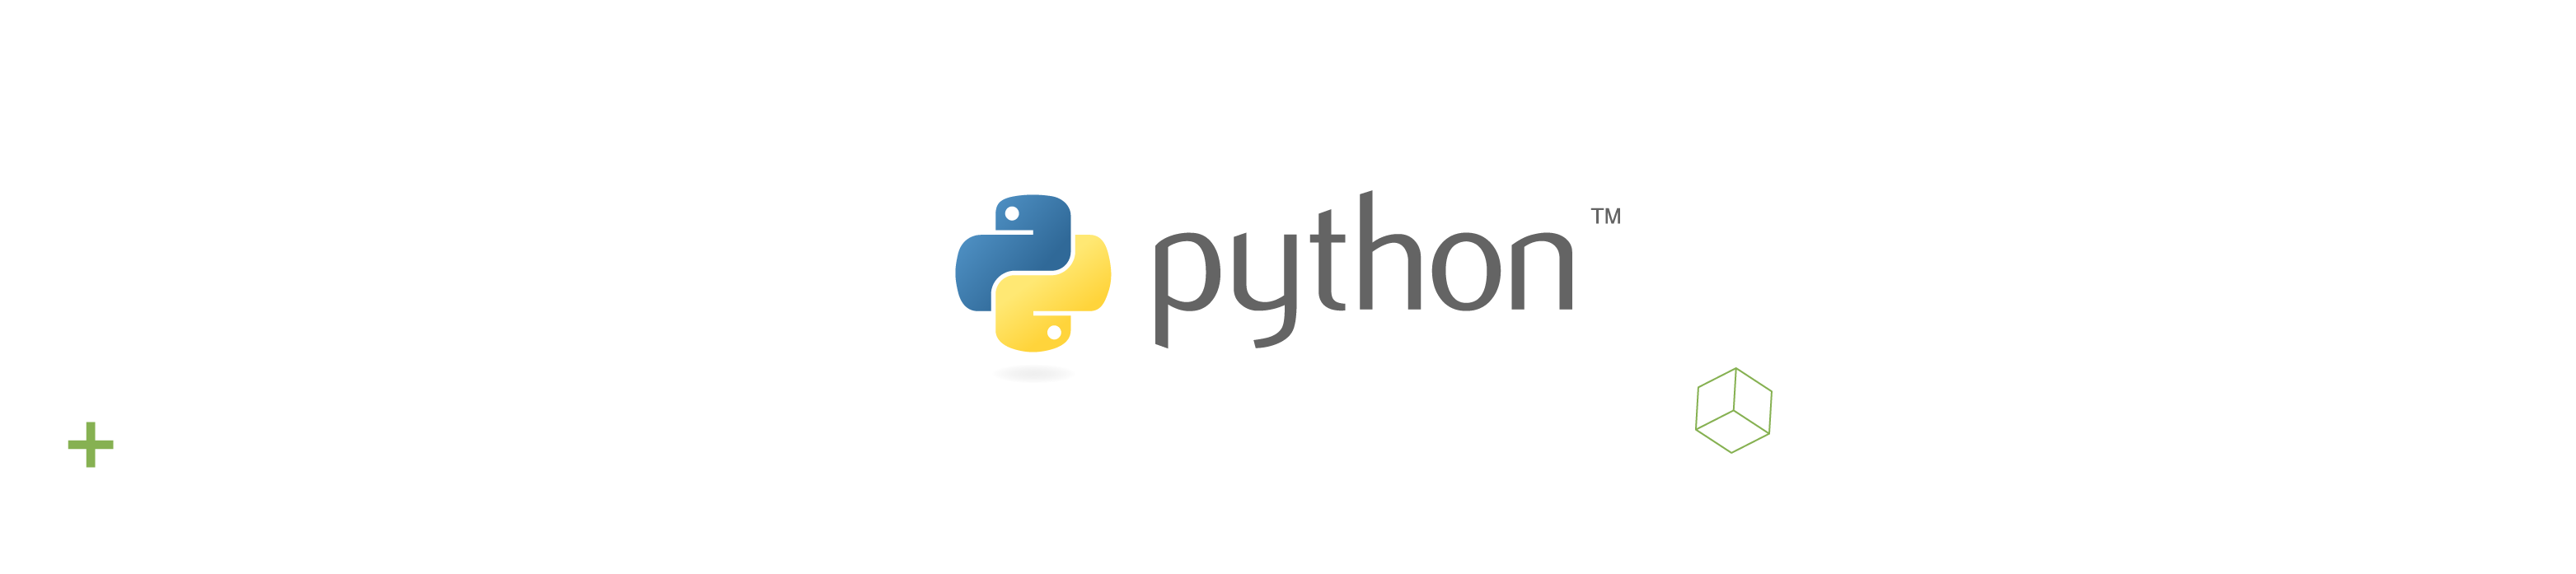 Why Python is the Best Programming Language for Programming Startups 2